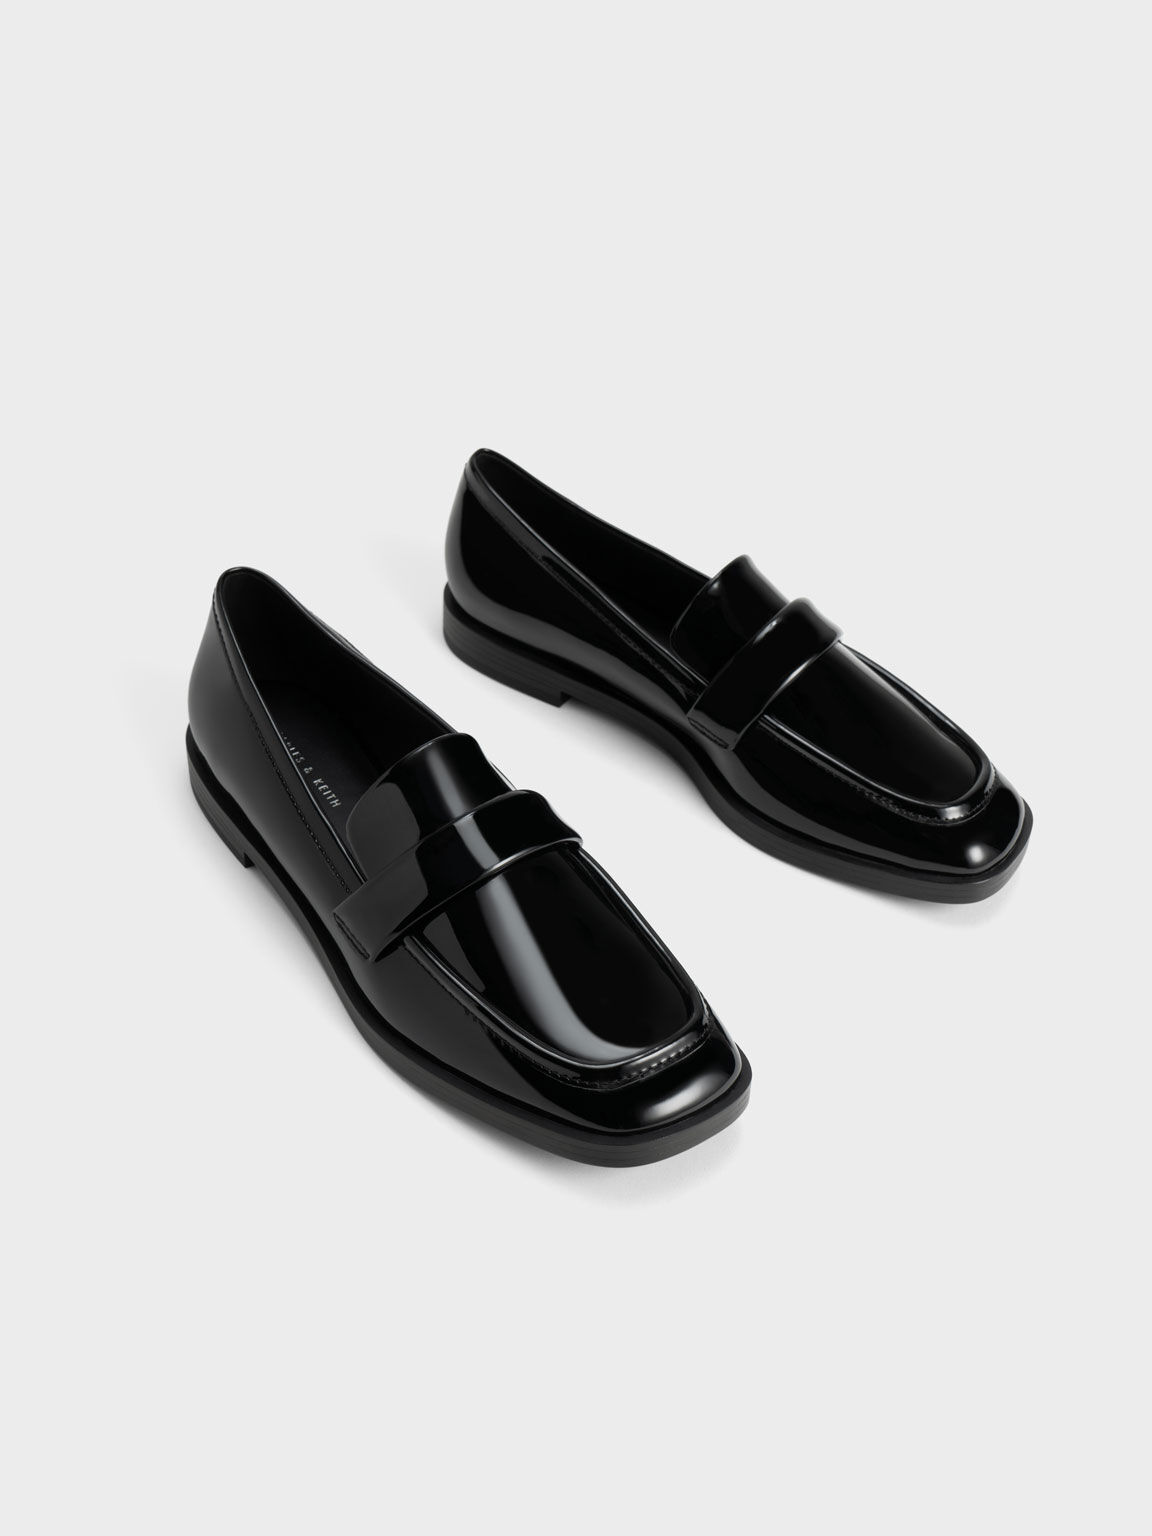 Patent Square-Toe Penny Loafers, Black Textured, hi-res